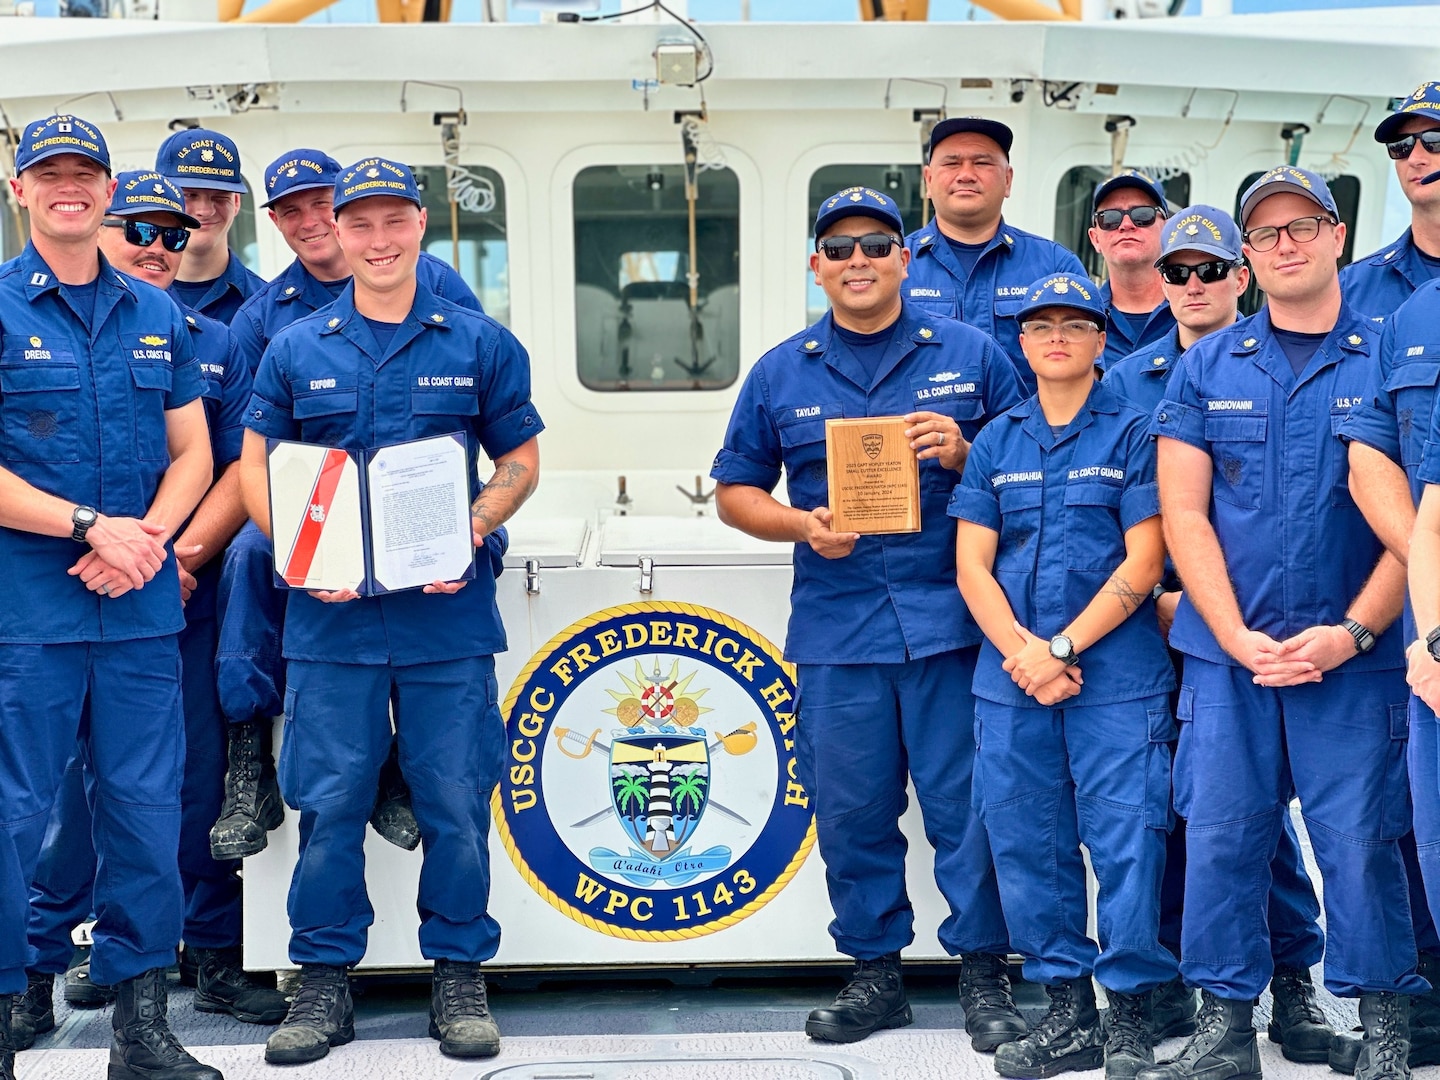 A portion of the crew of the USCGC Frederick Hatch (WPC 1143) stands for a photo on March 14, 2024, in Santa Rita, Guam. In January 2024, the Surface Navy Association National Symposium in Washington, D.C., was marked by the commendation of the USCGC Frederick Hatch (WPC 1143) crew as the recipient of the prestigious 2023 Hopley Yeaton Cutter Excellence Award (Small). This accolade recognizes operational efficiency and pays tribute to the spirit of pioneering leadership and maritime governance that defines the U.S. Coast Guard. (U.S. Coast Guard photo by Chief Warrant Officer Sara Muir)